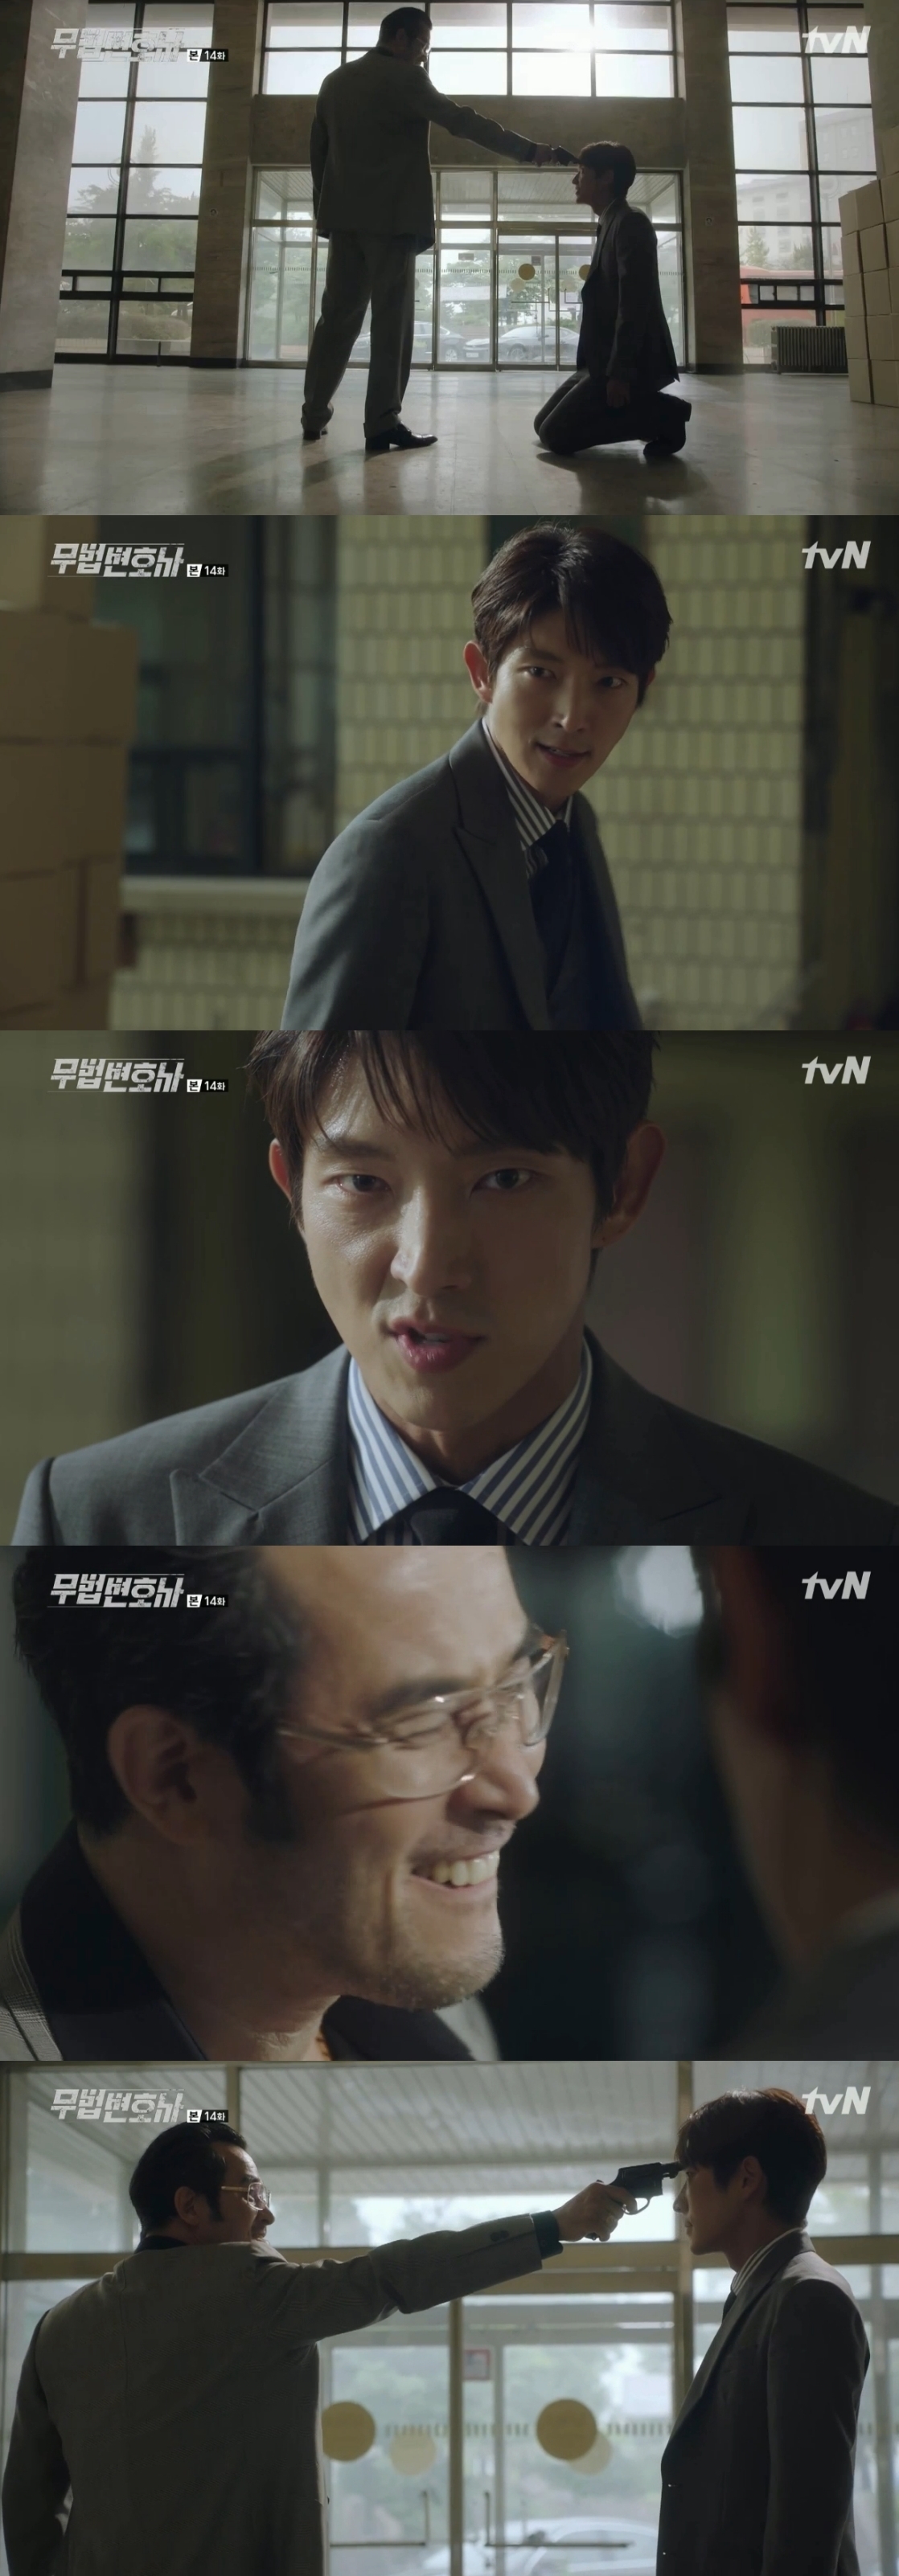 Seoul = = Lee Joon-gi knelt before Choi Min-soo to save Seo Ye-ji.On TVN Lawless Lawyer, which aired at 9:15 pm on the 24th, An Oh-ju (Choi Min-soo), who was doing the last culprit to catch Bong Sang-pil (Lee Joon-gi), was portrayed.On this day, An Oh-ju was convinced that only Seo Ye-ji was the only way to catch Bong Sang-pil.Anoju sent a video of Ha Jae to Bong Sang-pil. Is it you who made me this way, but now I am mean?You should also put me back to the starting point. I received a phone call and worried about Ha Jae-yi.Nam Soon-ja (Yum Hye-ran) decided to let Judge Cha Moon-sook go to Blackmail – Cinémix Par Chloé when he was in crisis.But Cha Moon-sook did not go to the door and tried to stop Nam Soon-jas mouth by responding to Blackmail - Cinémix Par Chloé with Blackmail.Nam Soon-ja, who was torn down, decided to accept Bong Sang-pils proposal.Prosecutor Kang Yeon-hee visited Bong Sang-pil. My mother decided to accept your deal. He handed over the foundations donation ledger, which Nam Soon-ja recorded.Chun Seung-bum warned that when Bong Sang-pil appeared as a lawyer for Nam Soon-ja, Do not use me for your revenge.Bong insisted on replacing the judge in the first trial, saying, Because the judge is likely to have an unfair trial, he said.There is evidence to be reasonably suspicious.  Judge Hong Woo-suk stepped back, saying, I will check what consensus doubts are for my honor. Bong Sang-pil announced that Judge Hong Woo-suk had been sold at a much cheaper price than the market price.During the trial, Ha Jae-yi received a phone call from An-oh and moved alone to meet him.If you dont come, I call your father, Anoju said, Blackmail – Cinémix Par Chloé.An-oh kidnapped Ha Jae-yi and gave Bong Sang-pil a location. An-oh said, If you want to protect something, there is something you want to protect. Bong Sang-pil said, You are a broken bowl.I have no power to attach it, just admit it, he advised.